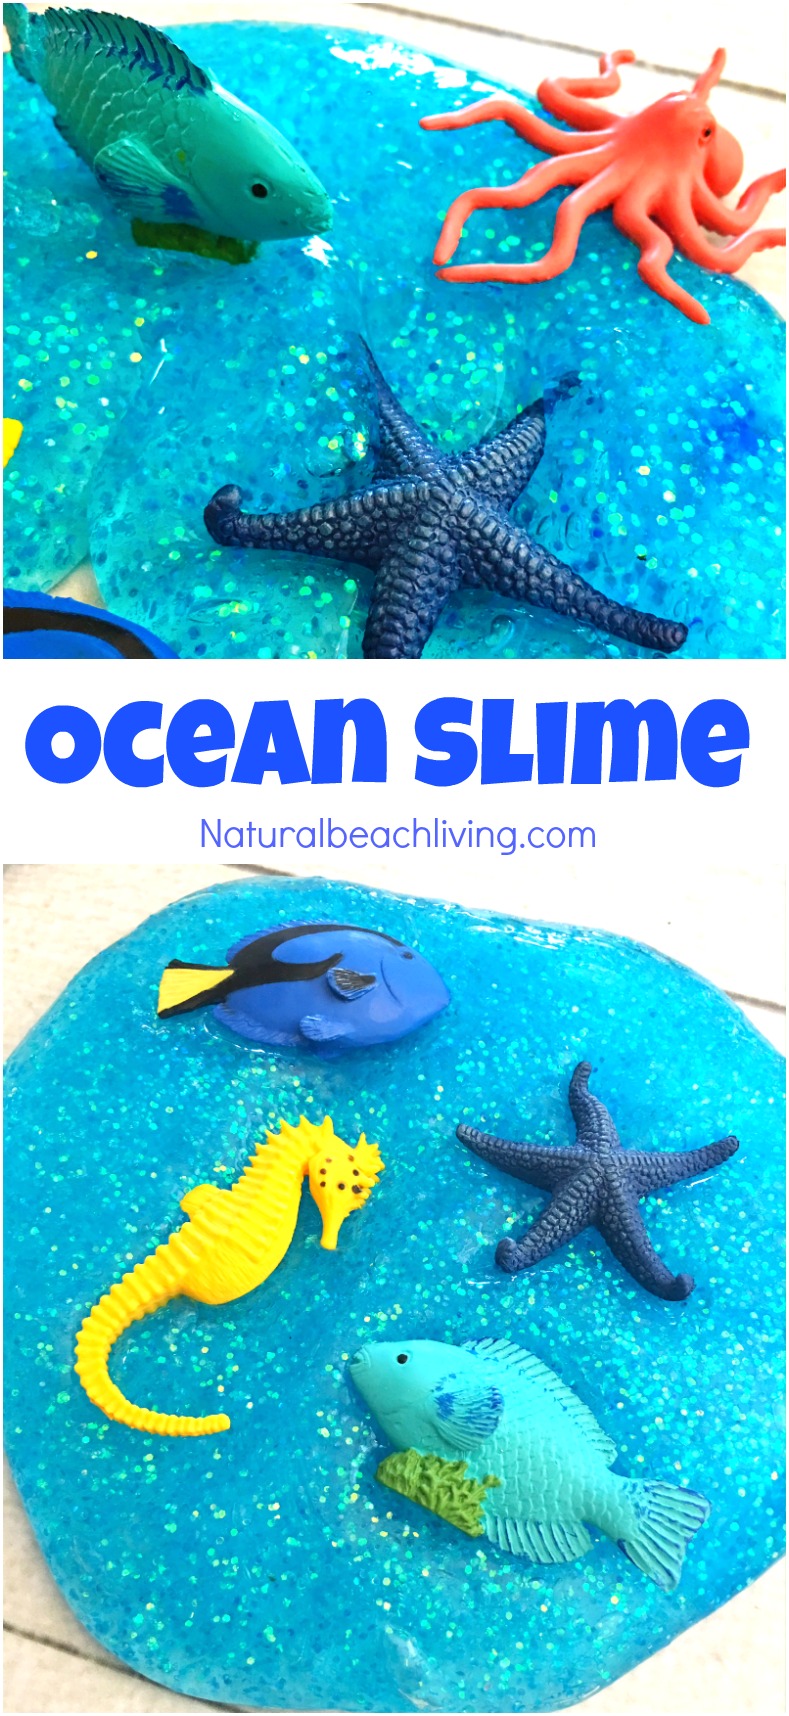 Best Ocean Theme Recipe for Slime, Ocean Slime Recipes, Jiggly Slime, Under the Sea Theme Activities, How to Make Slime, Perfect Glittery Slime Recipe for Kids, Ocean Activities #slimerecipe #slime